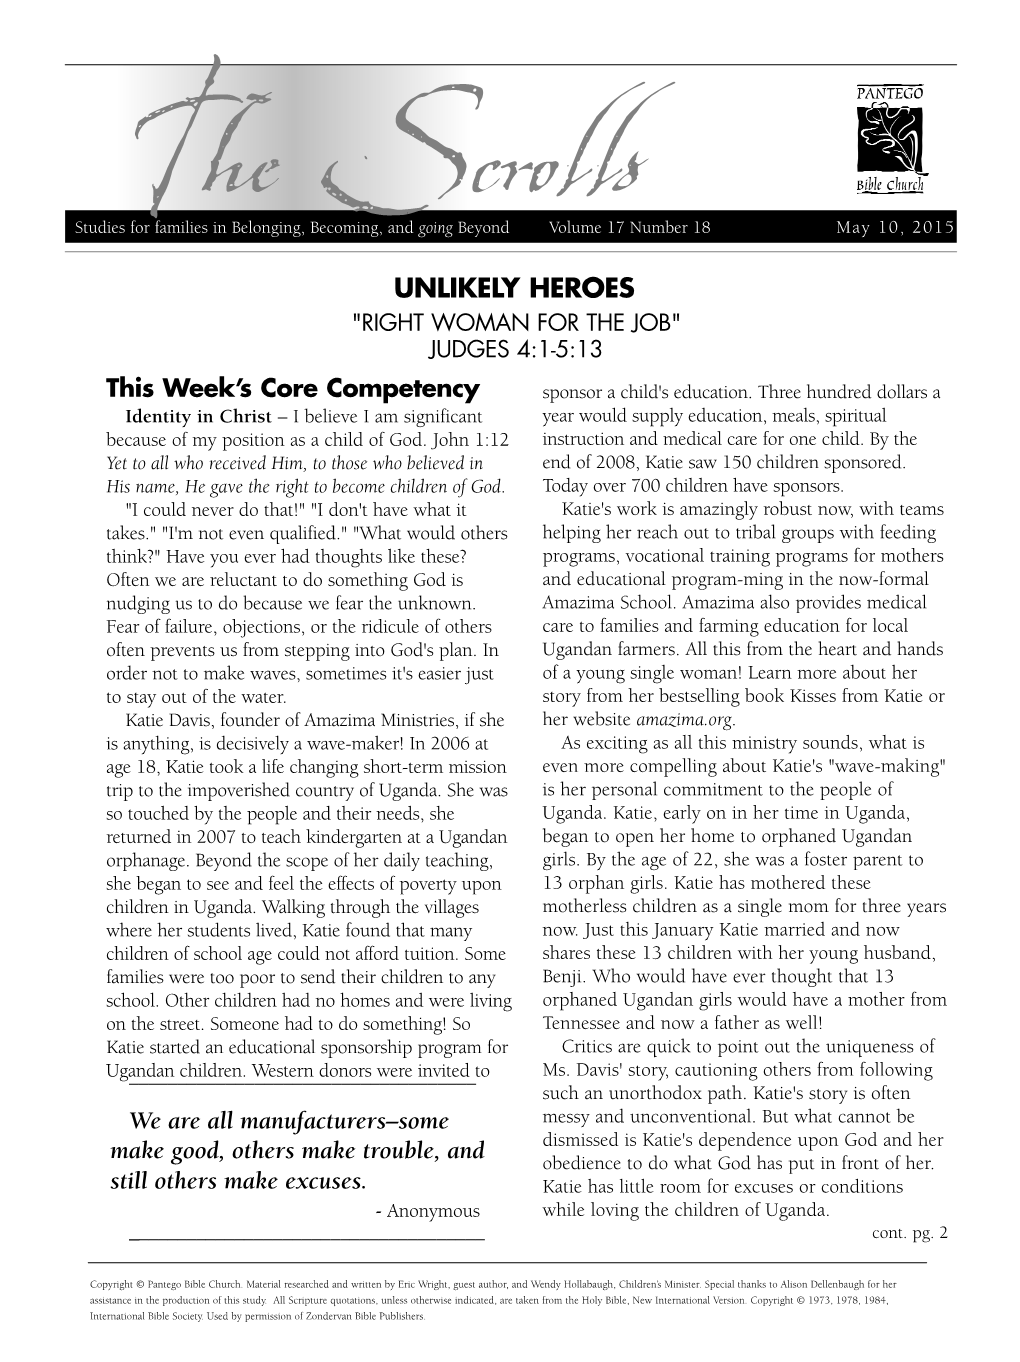 Unlikely Heroes "Right Woman for the Job" Judges 4:1-5:13